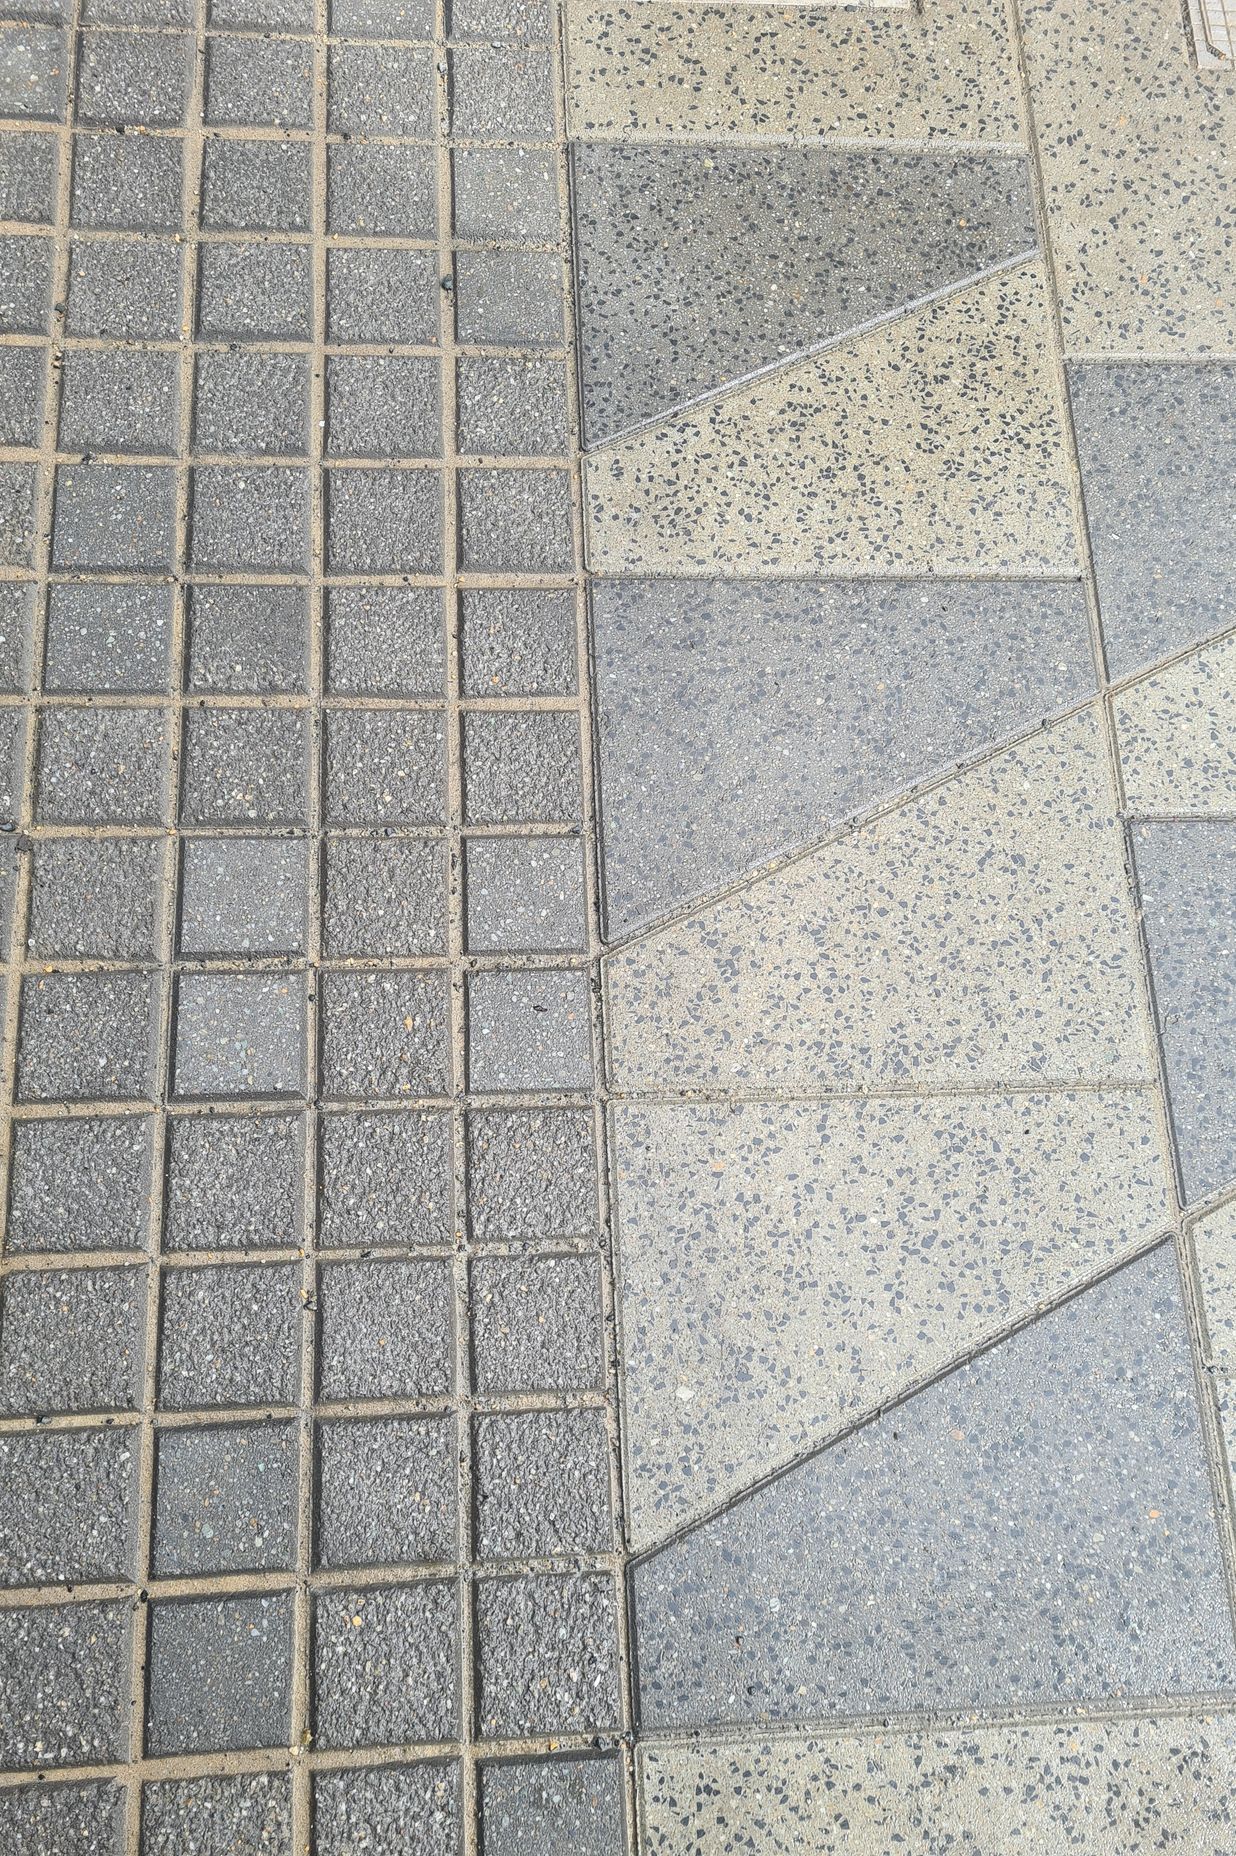 The lighter pavers used gold colour stone derived from Dunedin’s surrounding hills, and the light and medium pavers incorporate black stone from Dunedin’s Blackhead Beach.